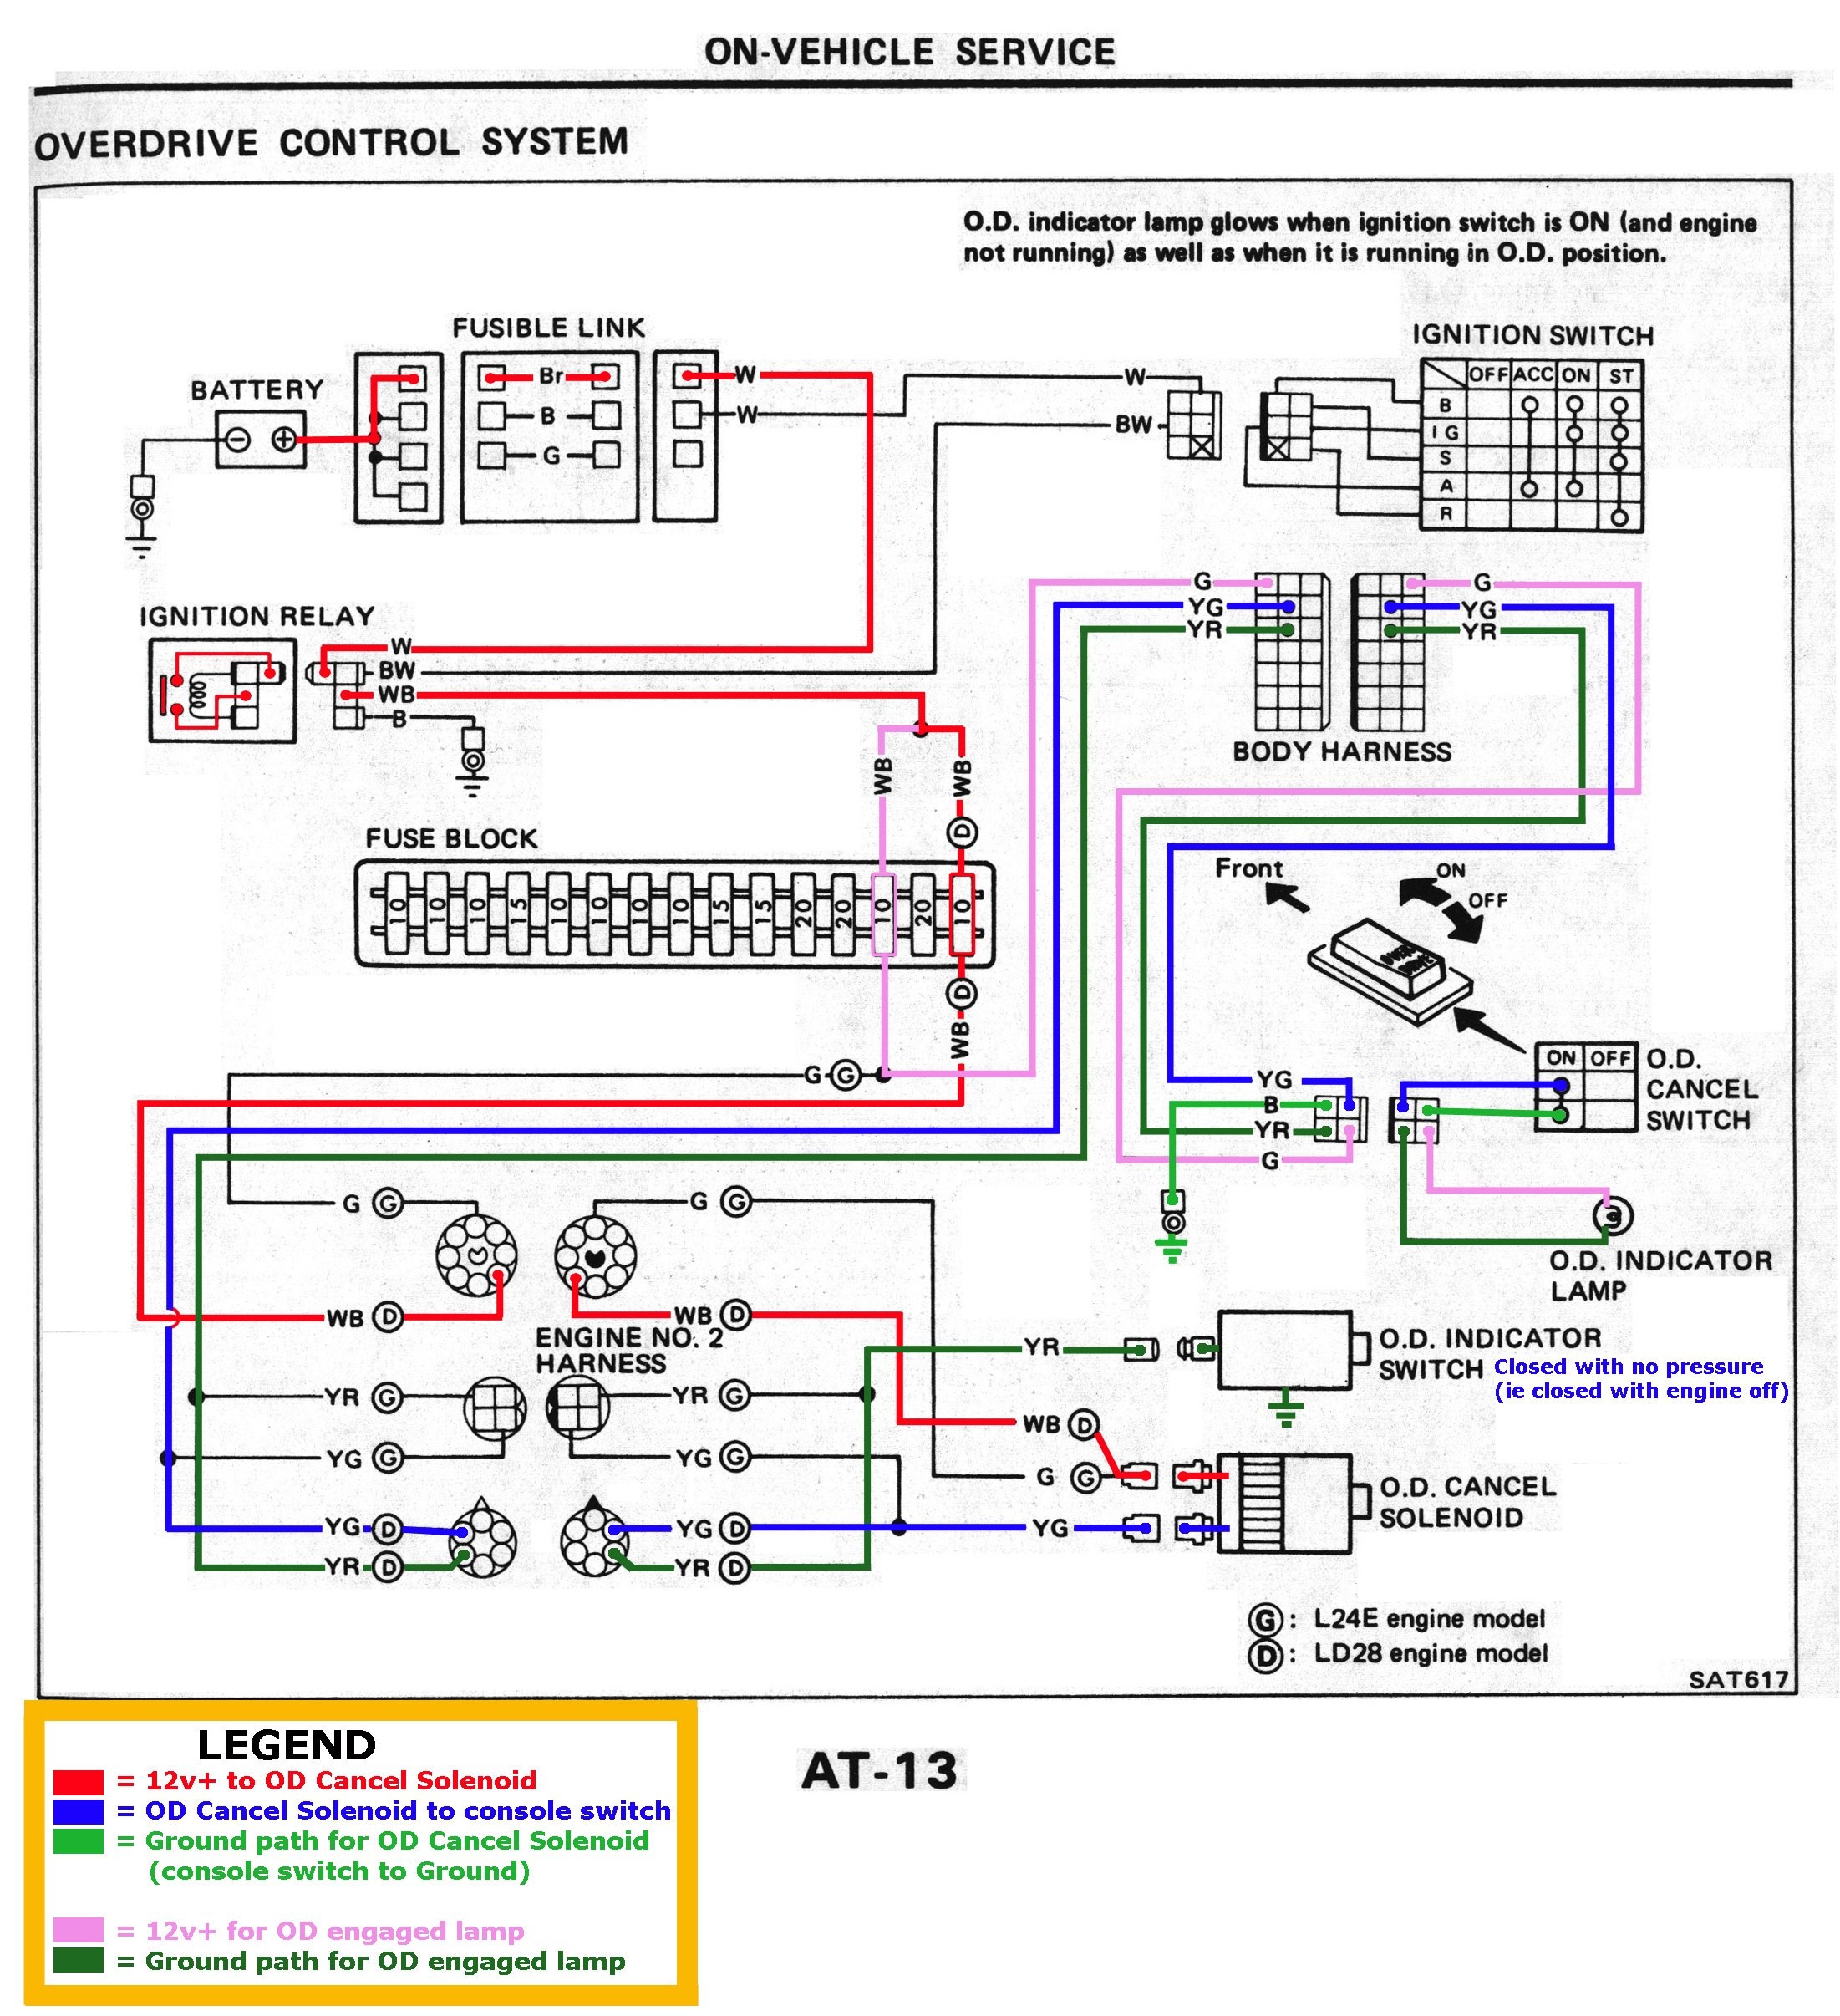 nissan ud wiring diagram Collection Wiring Diagram For Backup Alarm Inspirationa Nissan sel Forums • DOWNLOAD Wiring Diagram